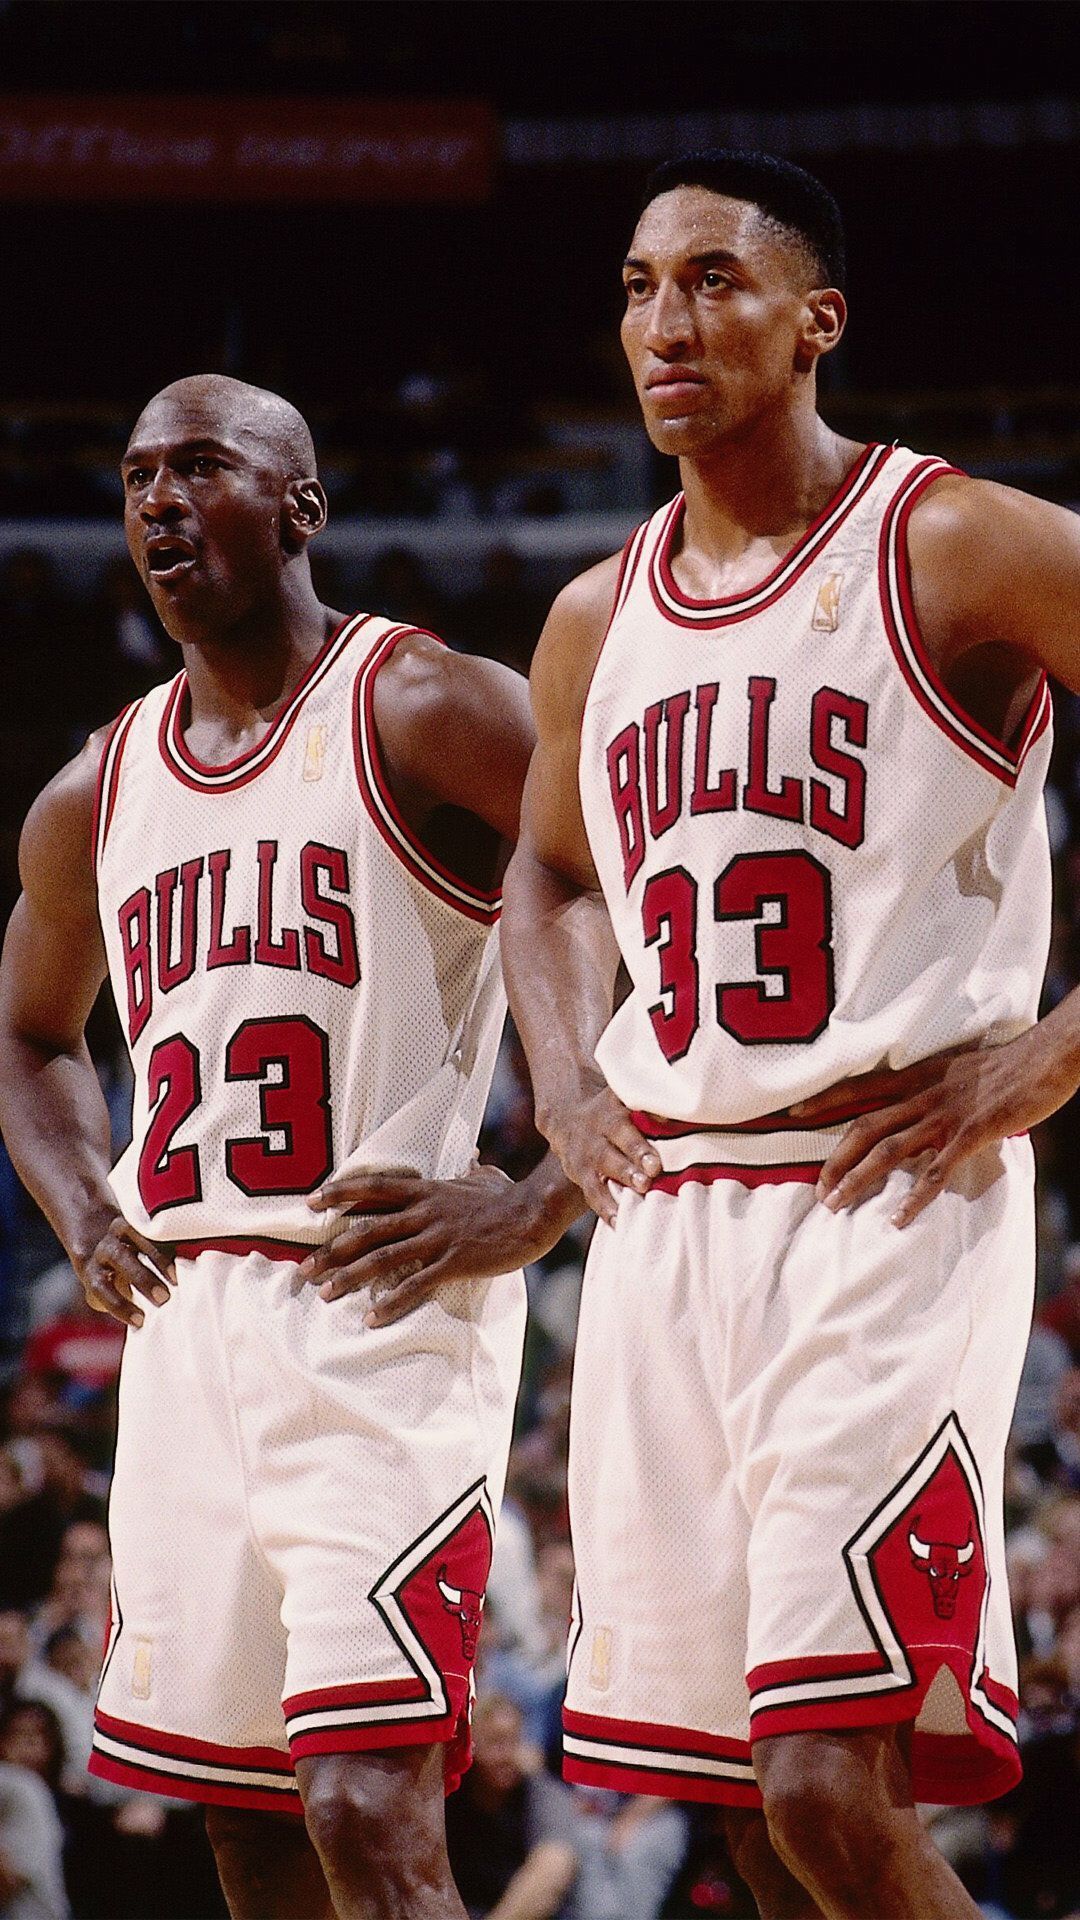 Scottie Pippen and Michael Jordan of the Chicago Bulls look on during a game in 1997. - Michael Jordan